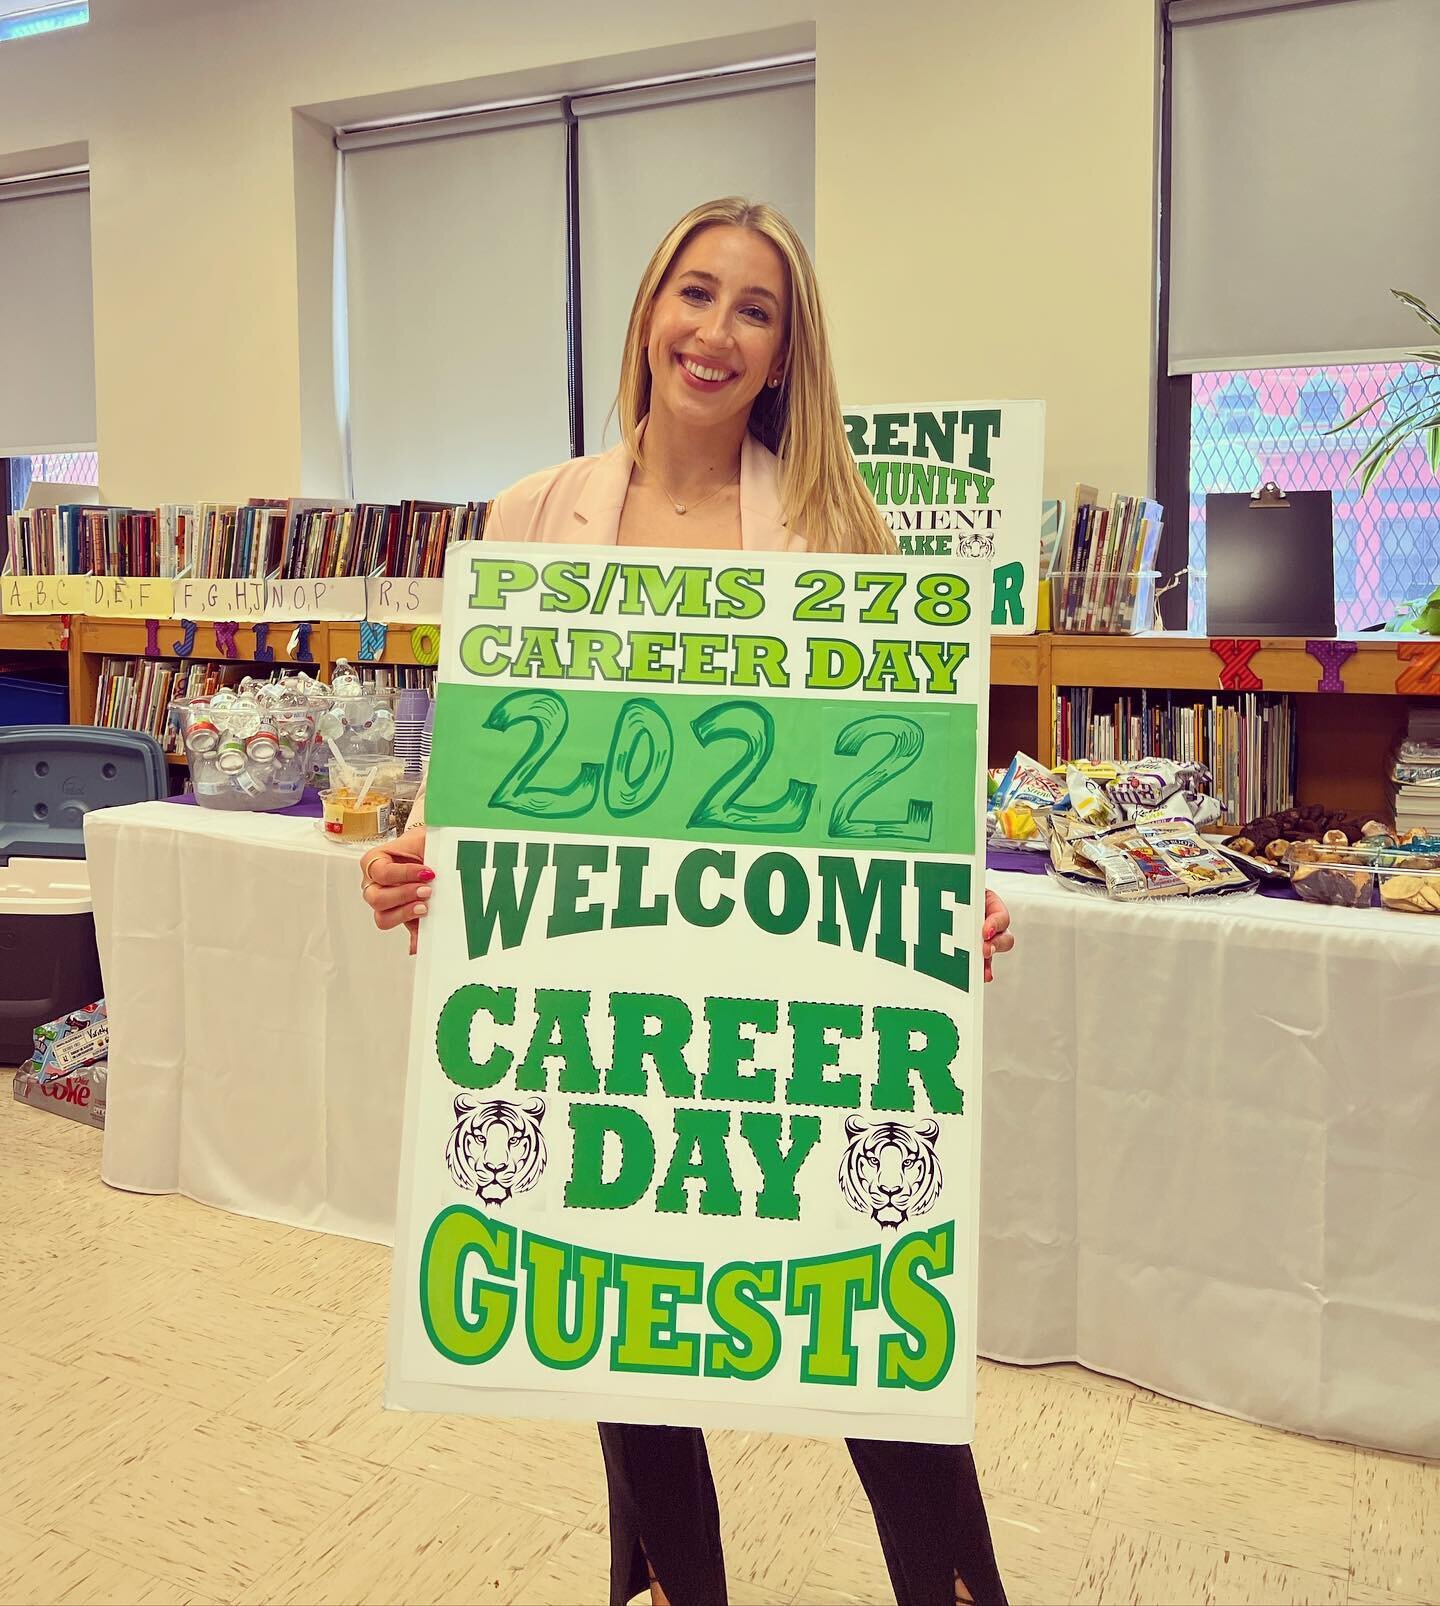 I LOVED being a part of Career Day at PS/MS 278 today!!! Looking forward to seeing what new young minds will bring to the field of psychology! Thank you to all of the teachers - you are all superheroes! And thank you to my  amazing team! @camprogram 